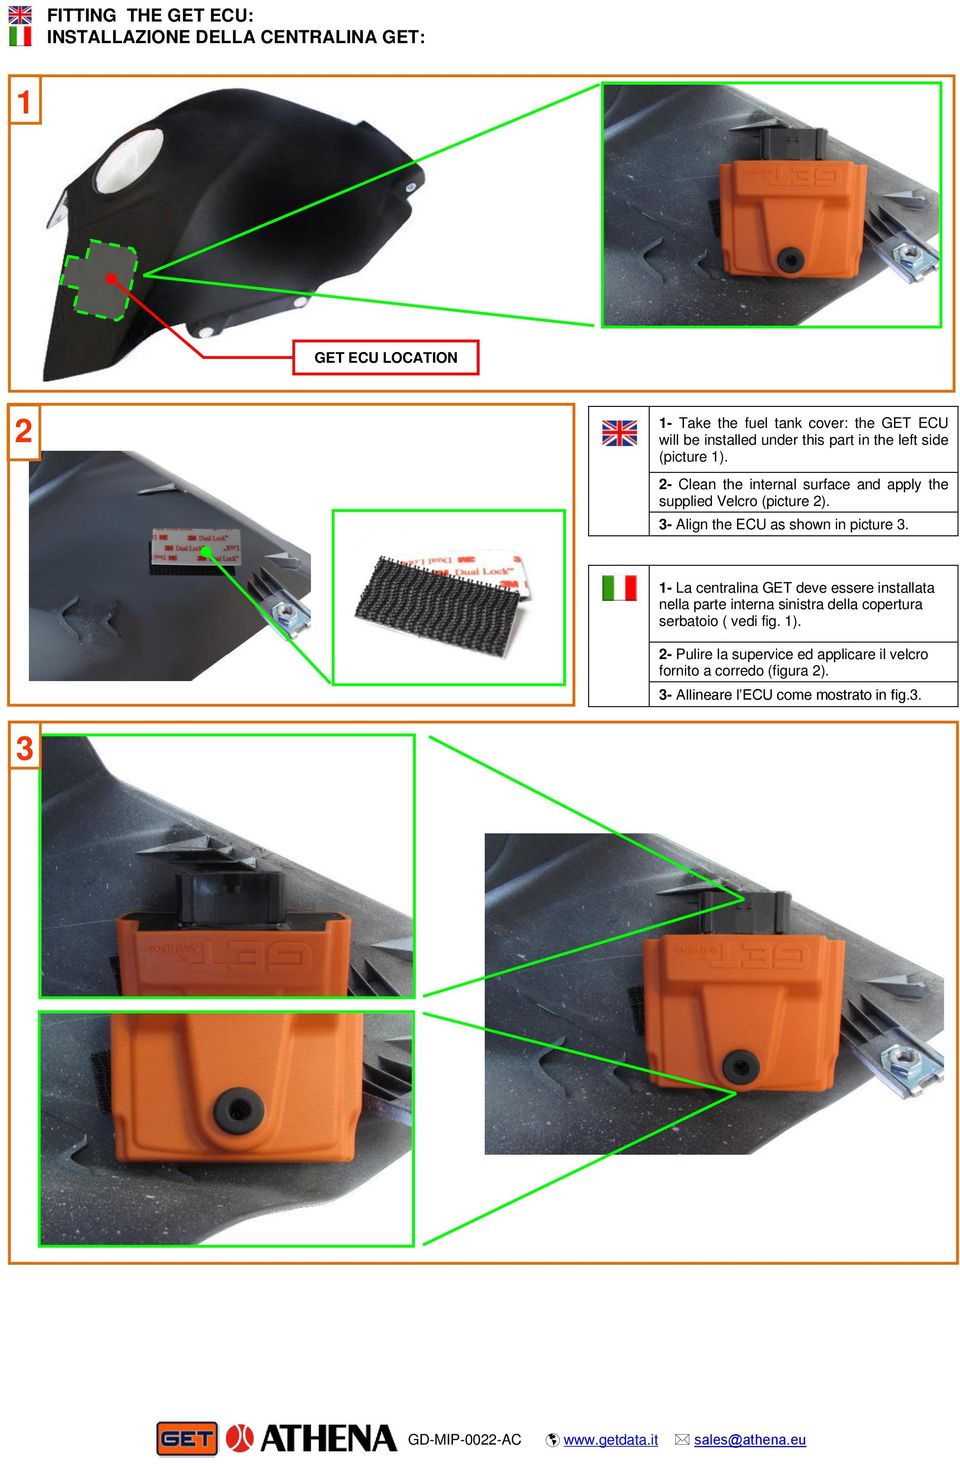 3- Align the ECU as shown in picture 3.